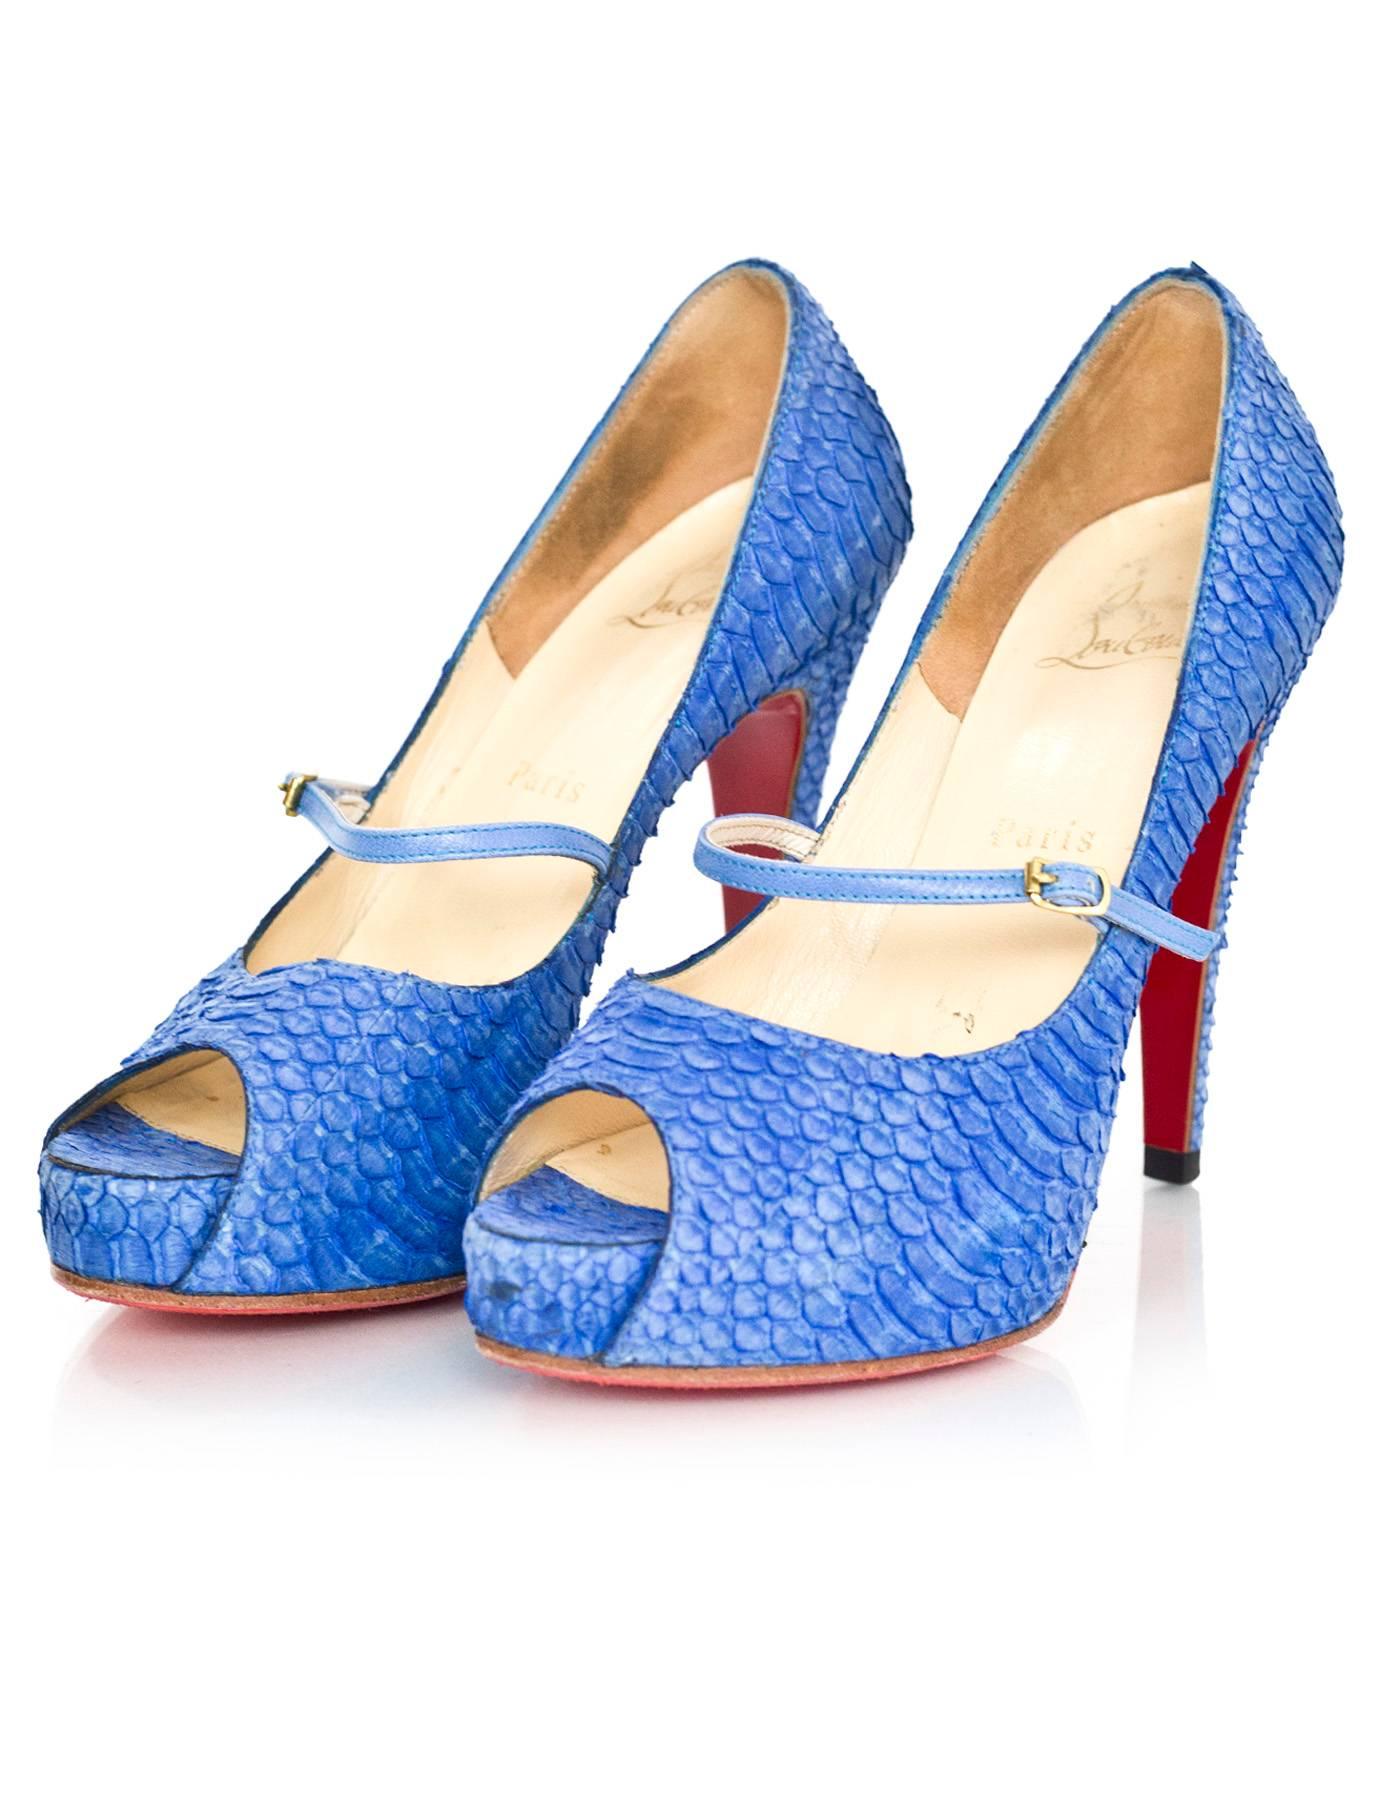 Christian Louboutin Blue Python Open-Toe Pumps Sz 36

Made In: Italy
Color: Blue
Materials: Python
Closure/Opening: Slide on with buckle over vamp
Sole Stamp: Christian Louboutin Made in Italy 36
Overall Condition: Excellent pre-owned condition with